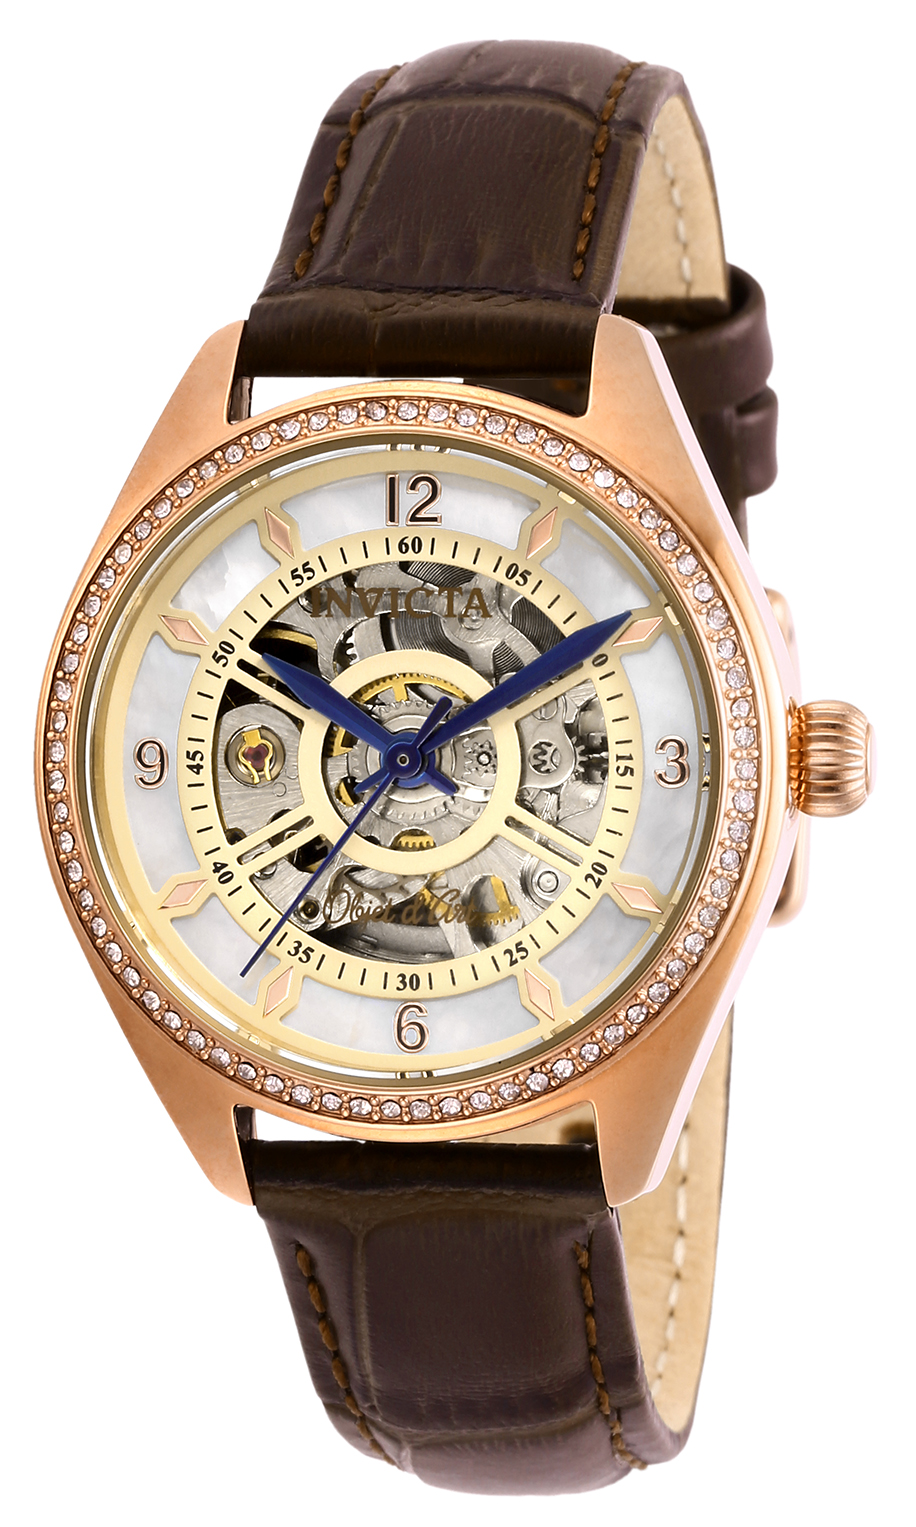 Invicta Objet D Art Automatic Women%27s Watch w/ Mother of Pearl Dial - 34mm, Brown (26354)